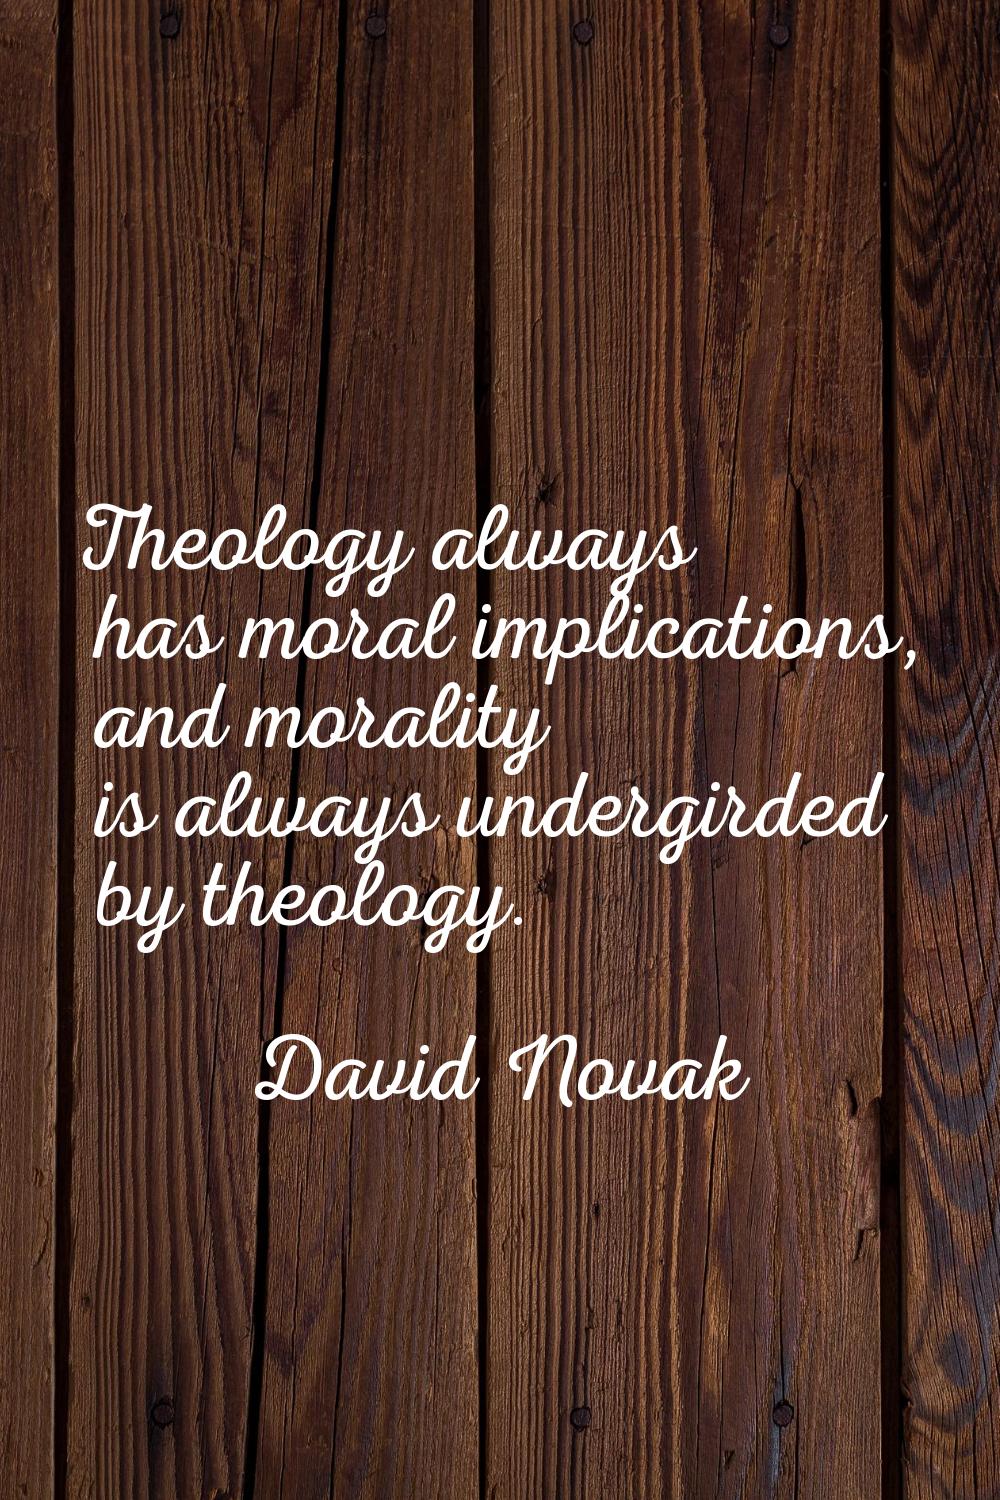 Theology always has moral implications, and morality is always undergirded by theology.